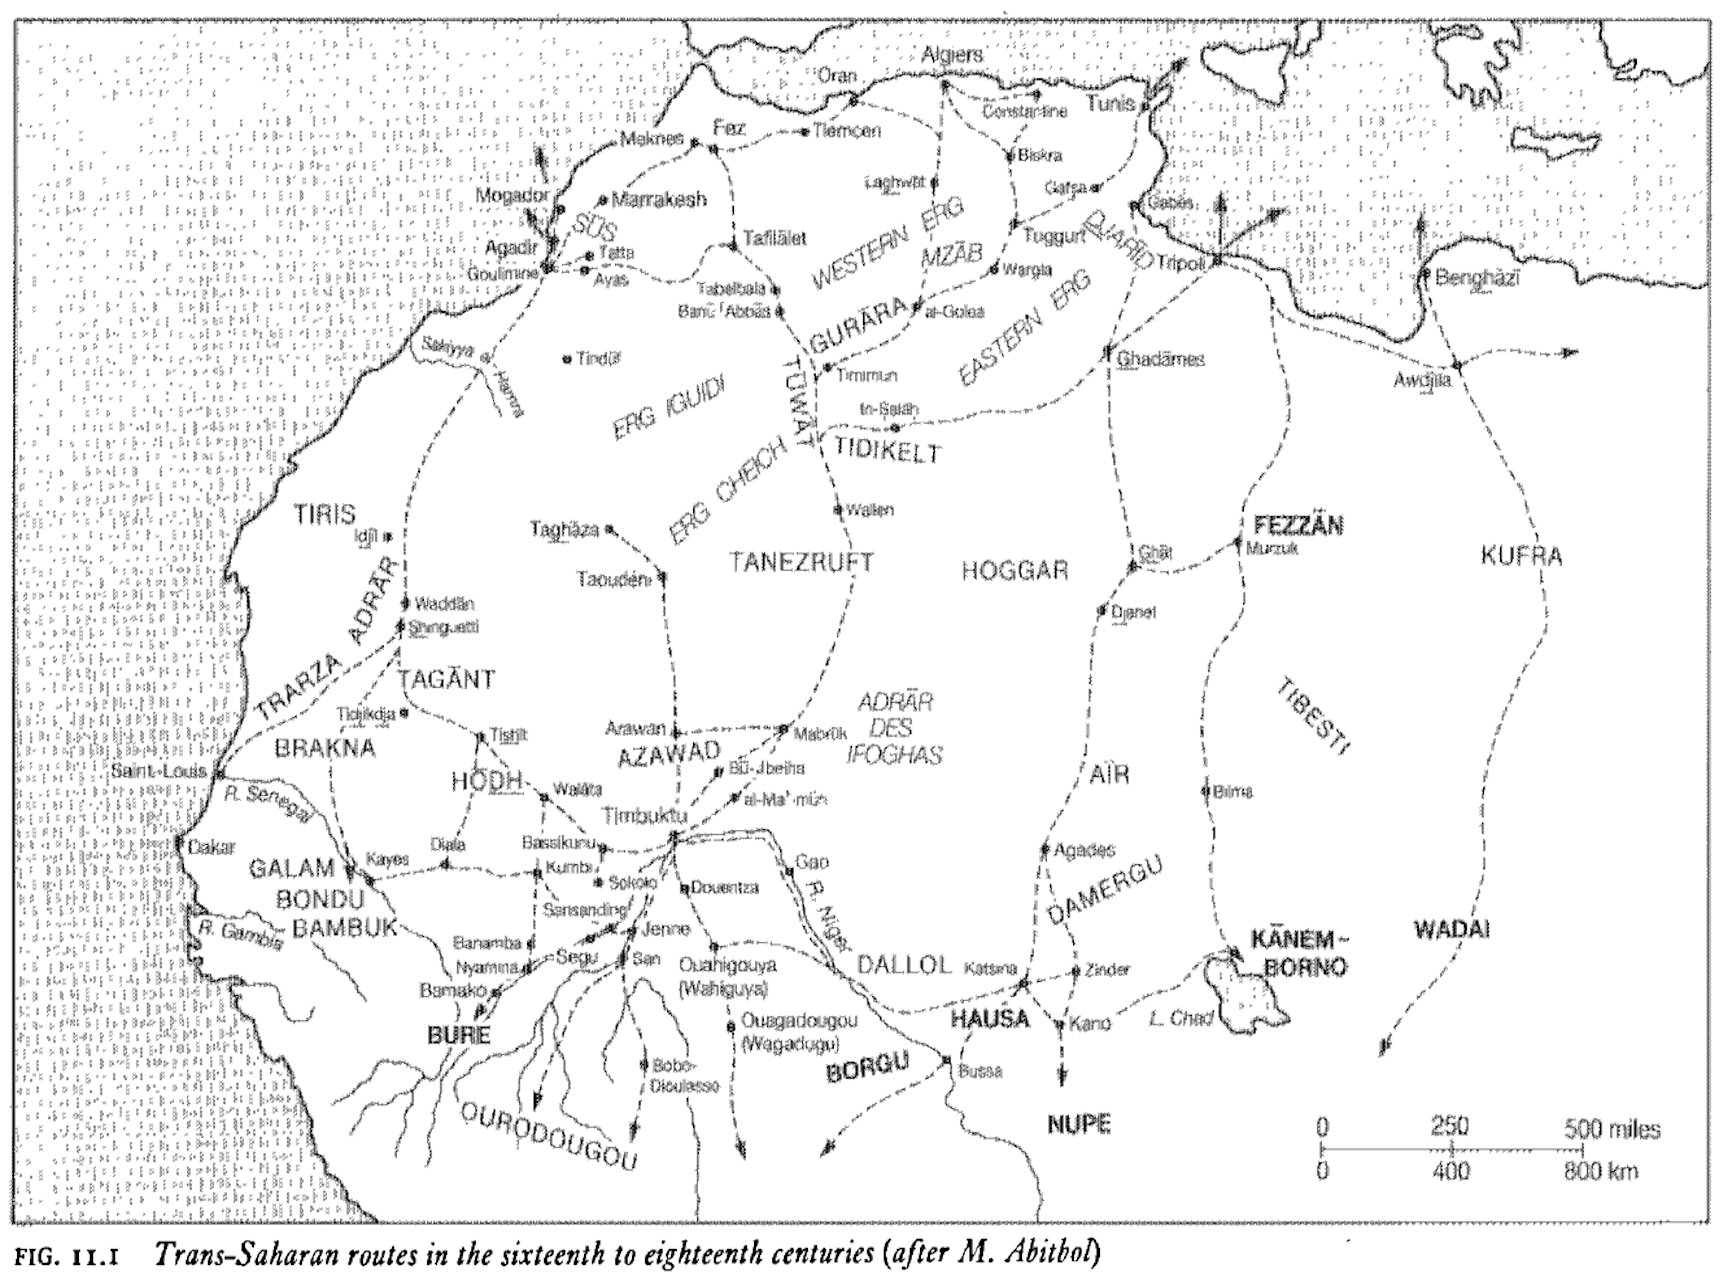 Trans-Saharan routes in the sixteenth to eighteenth centuries.png